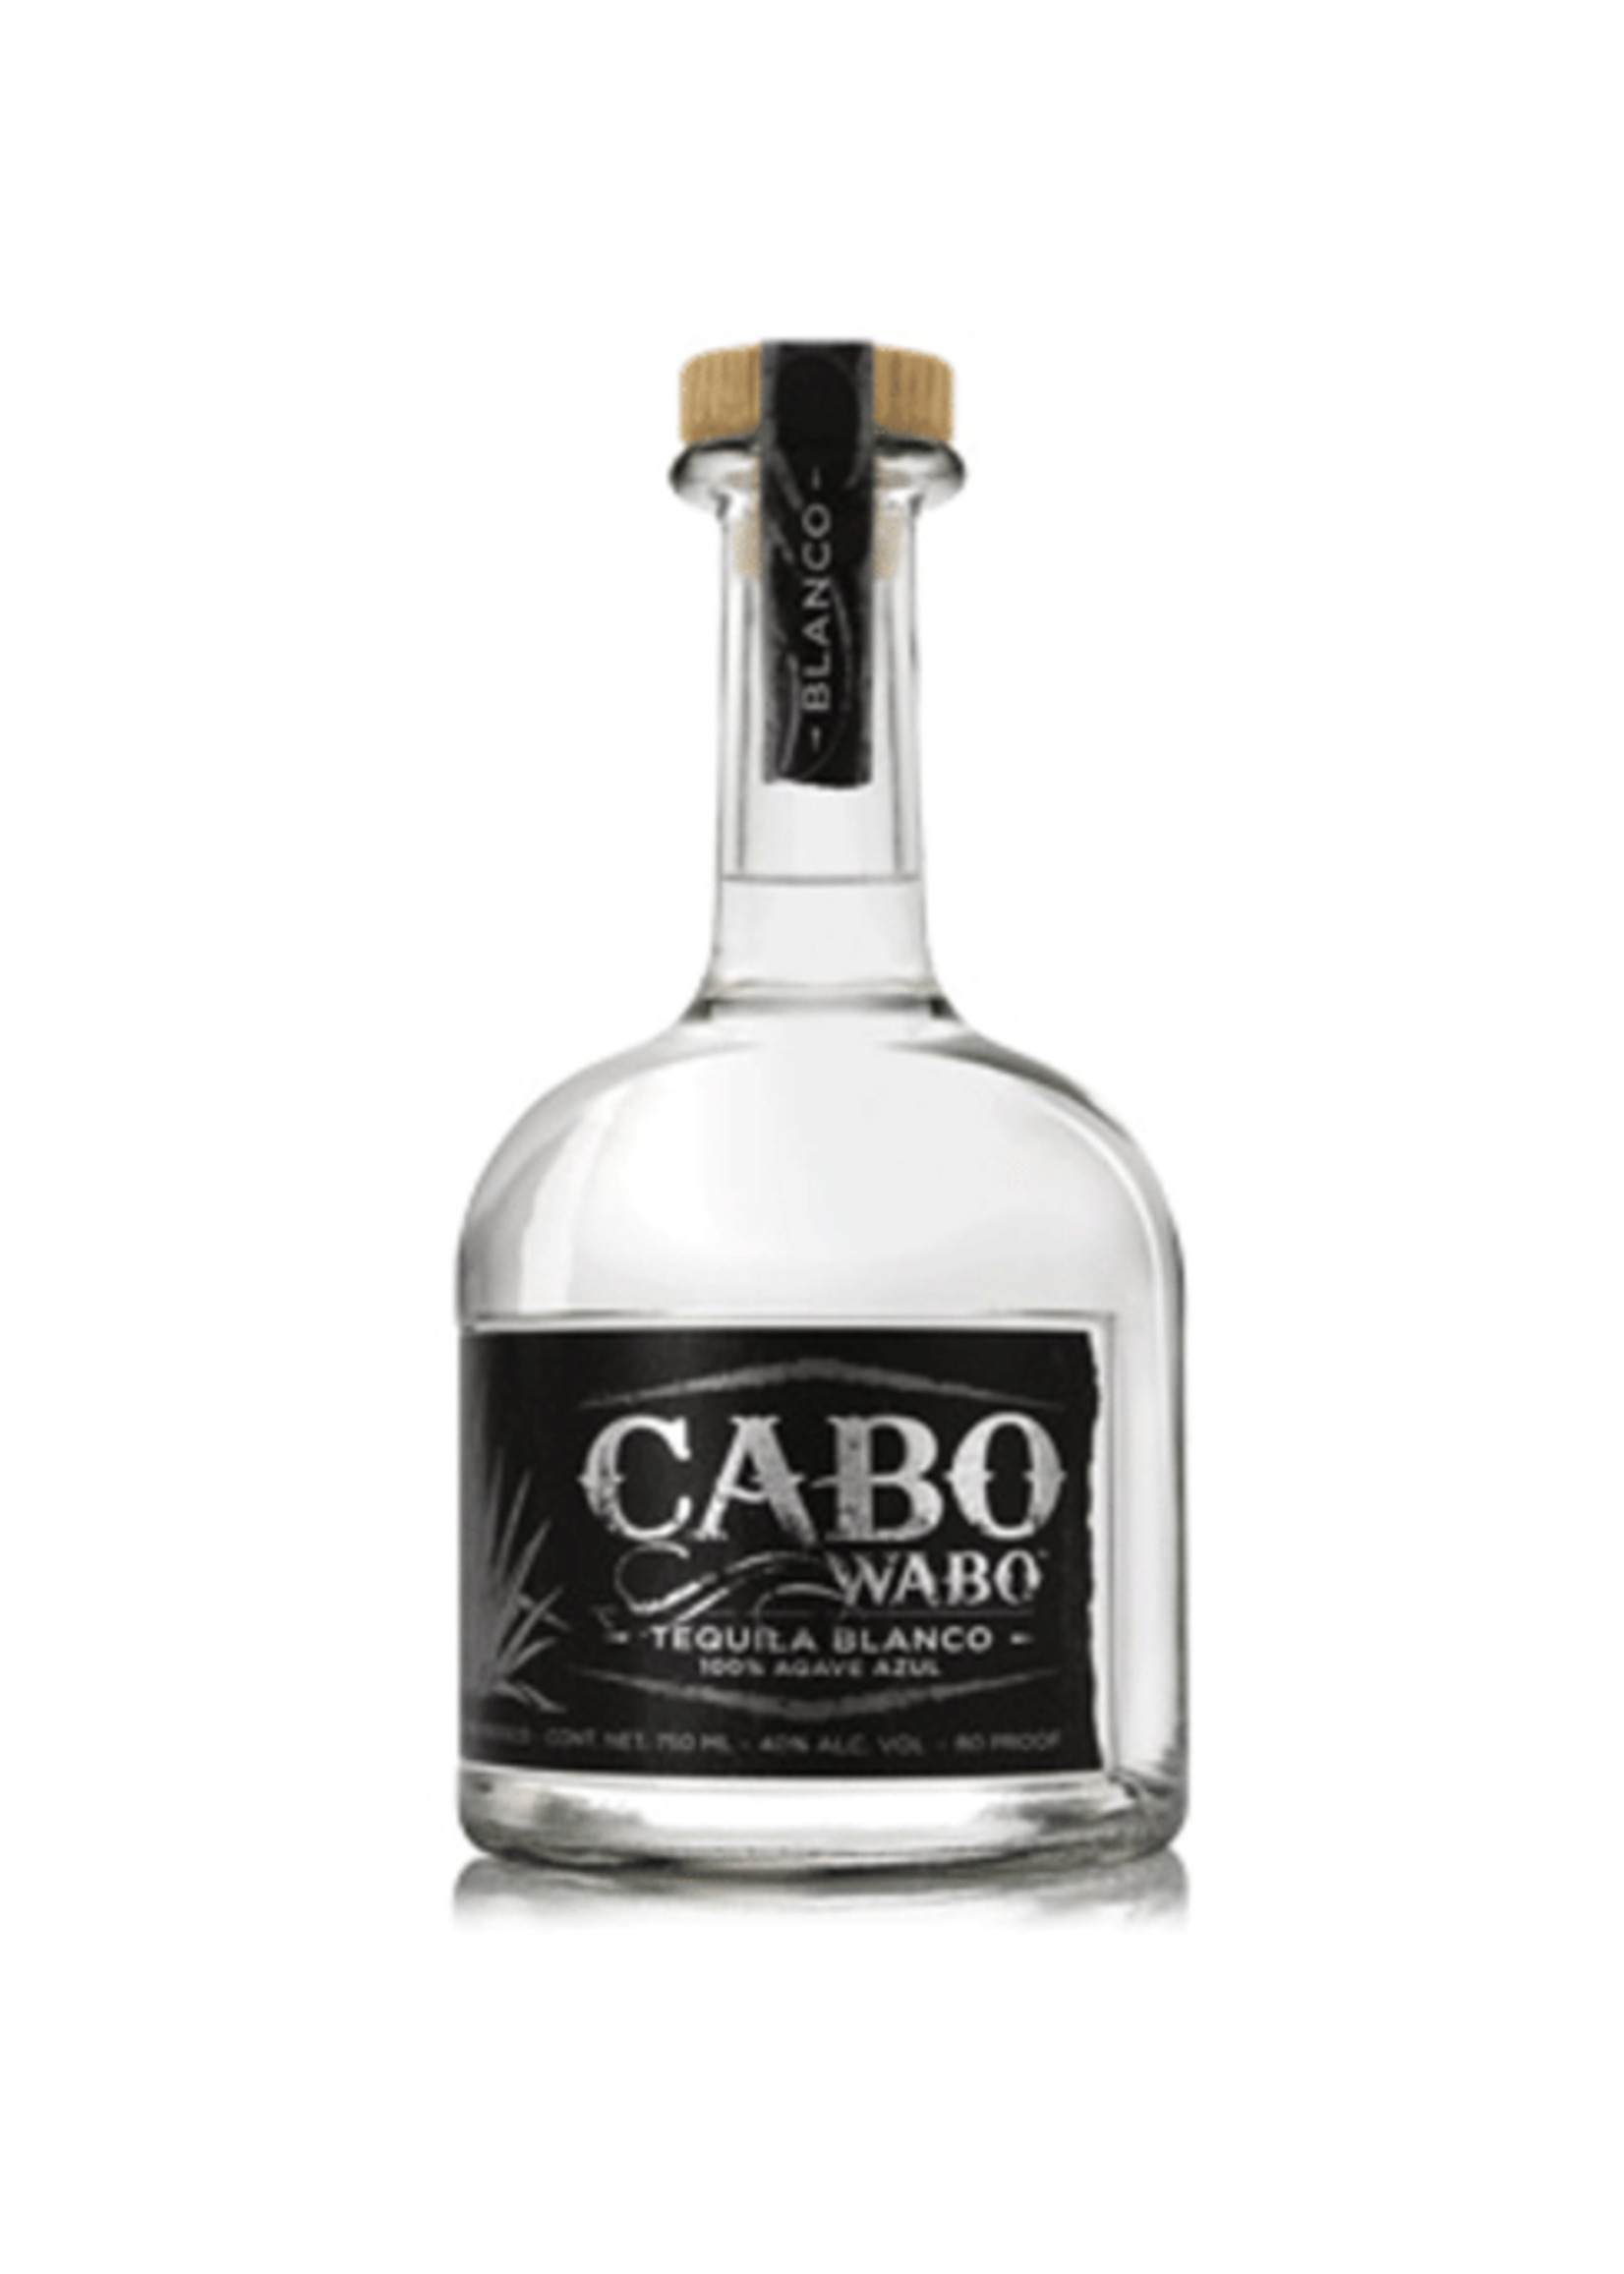 CABO WABO CABO WABO	BLANCO TEQUILA	.750L